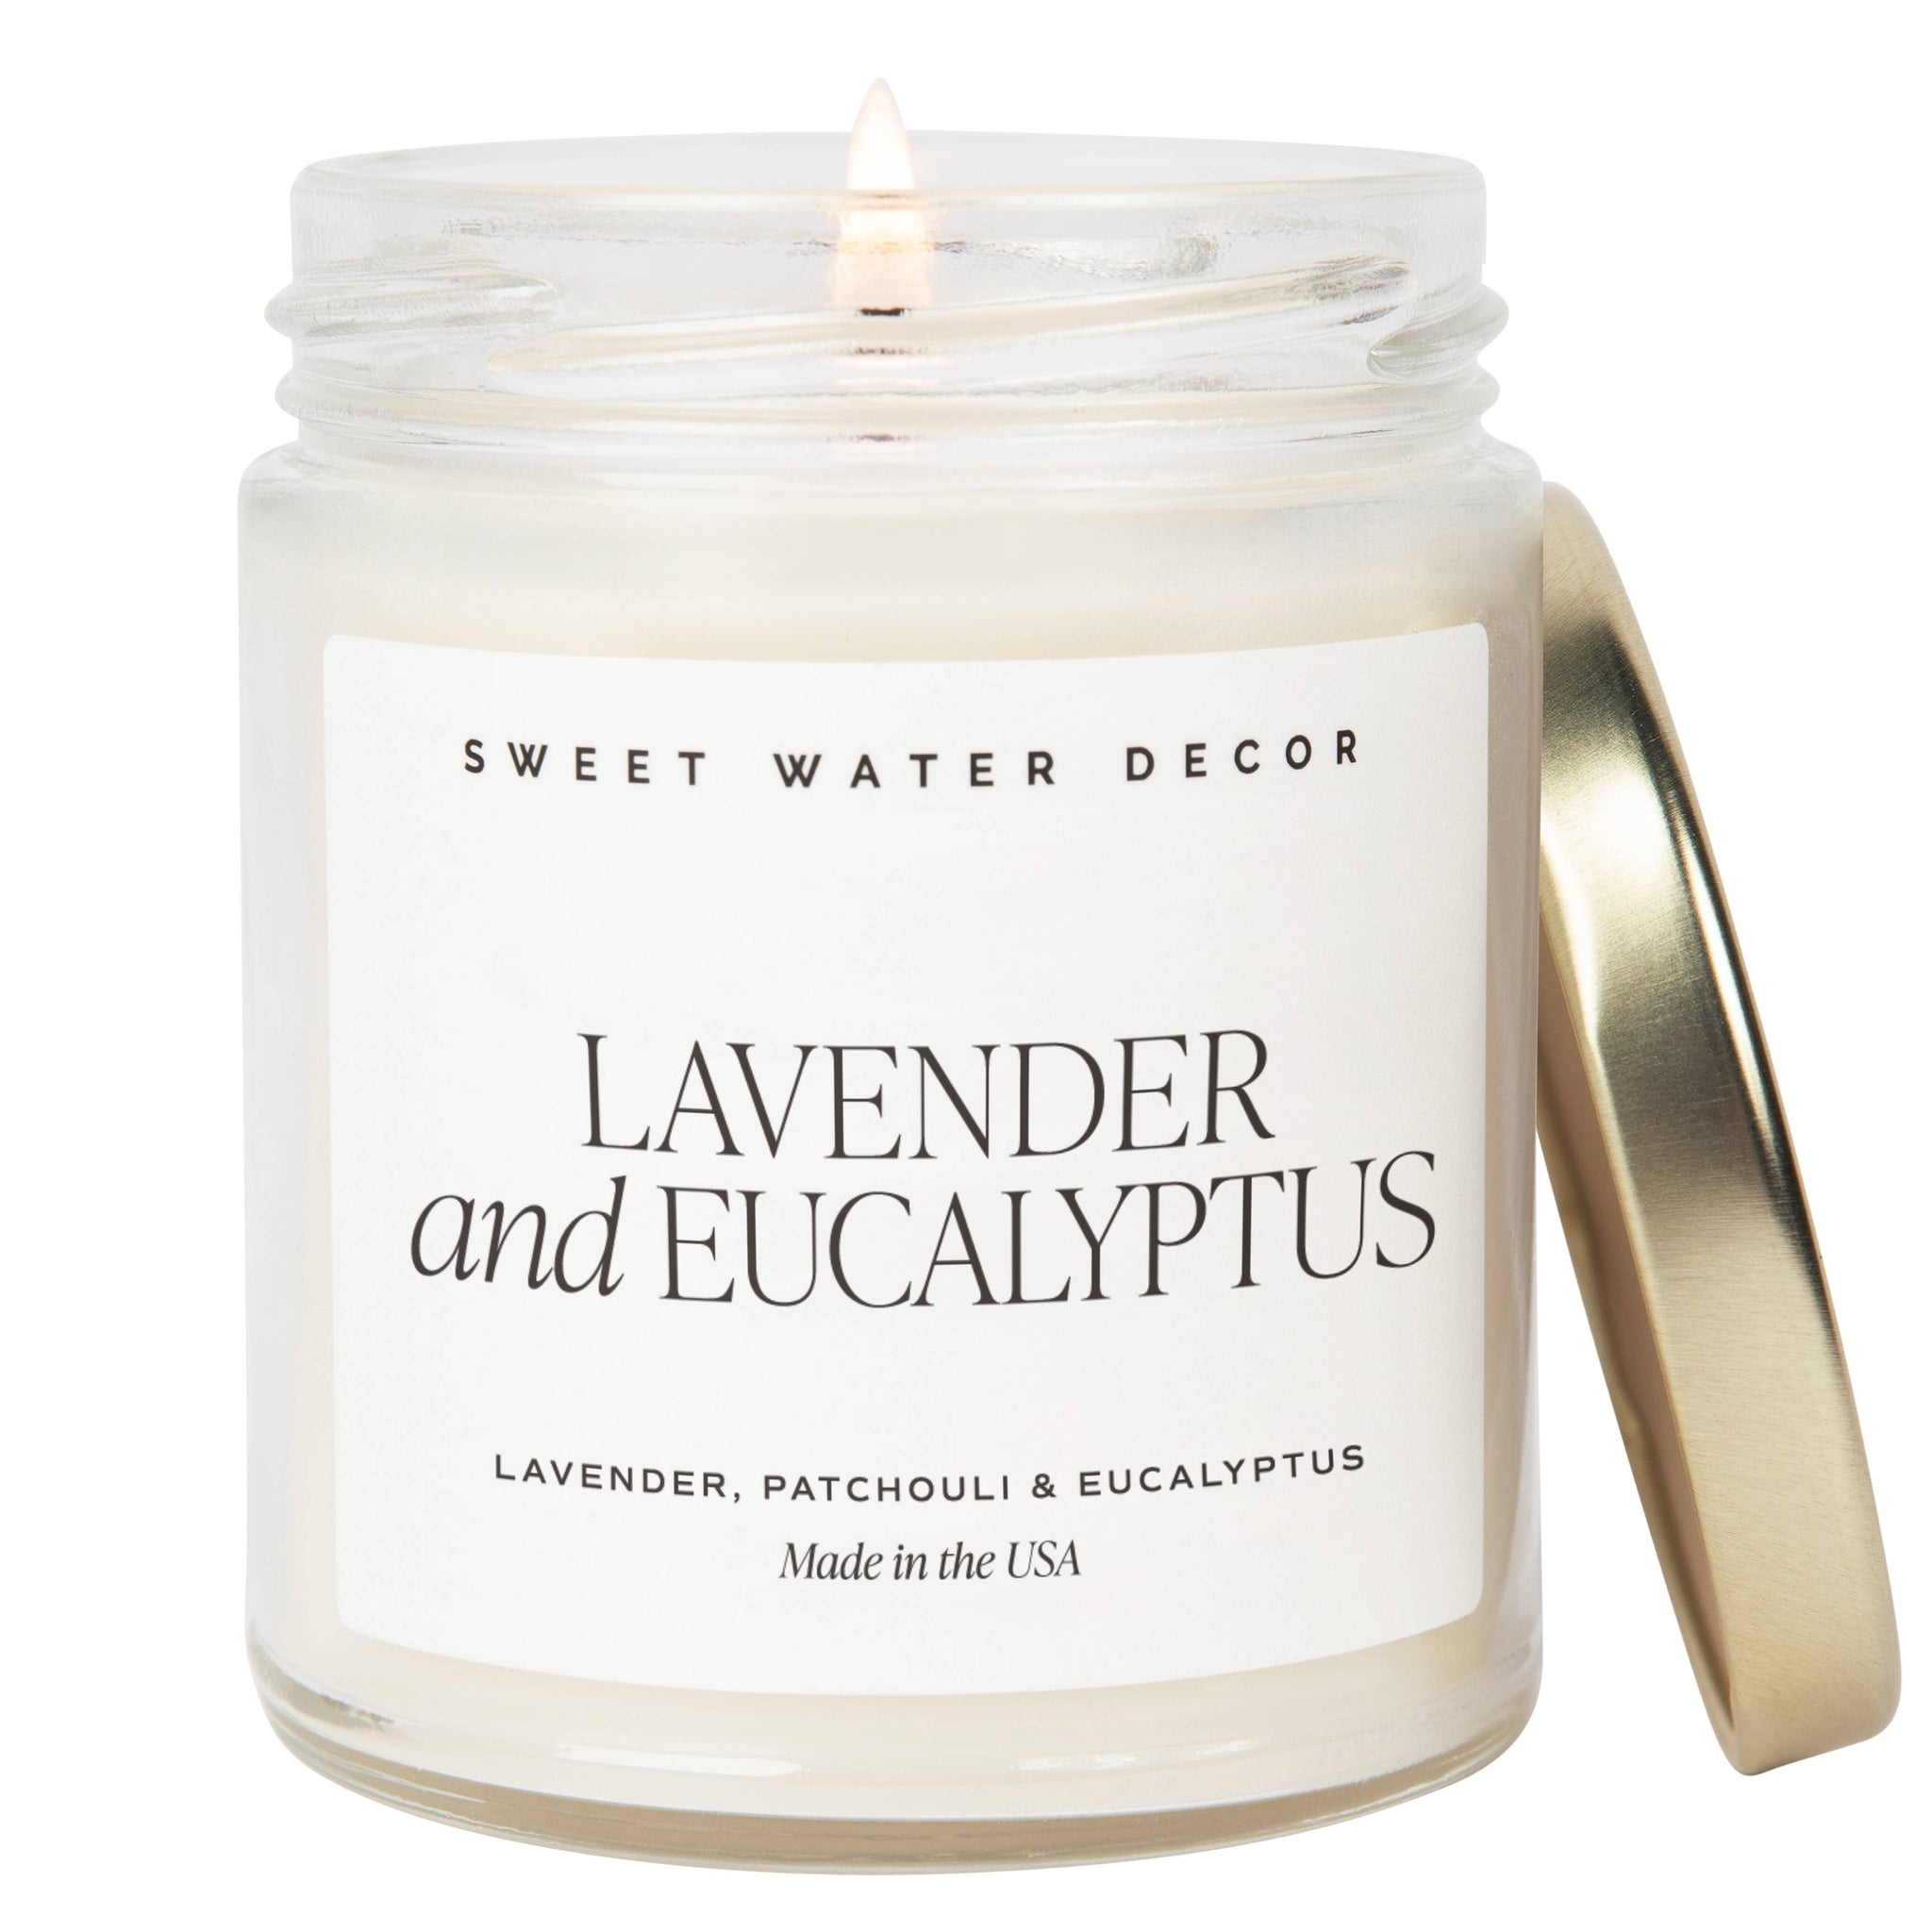 Lavender and Eucalyptus 9 oz Soy Candle - Home Decor & Gifts